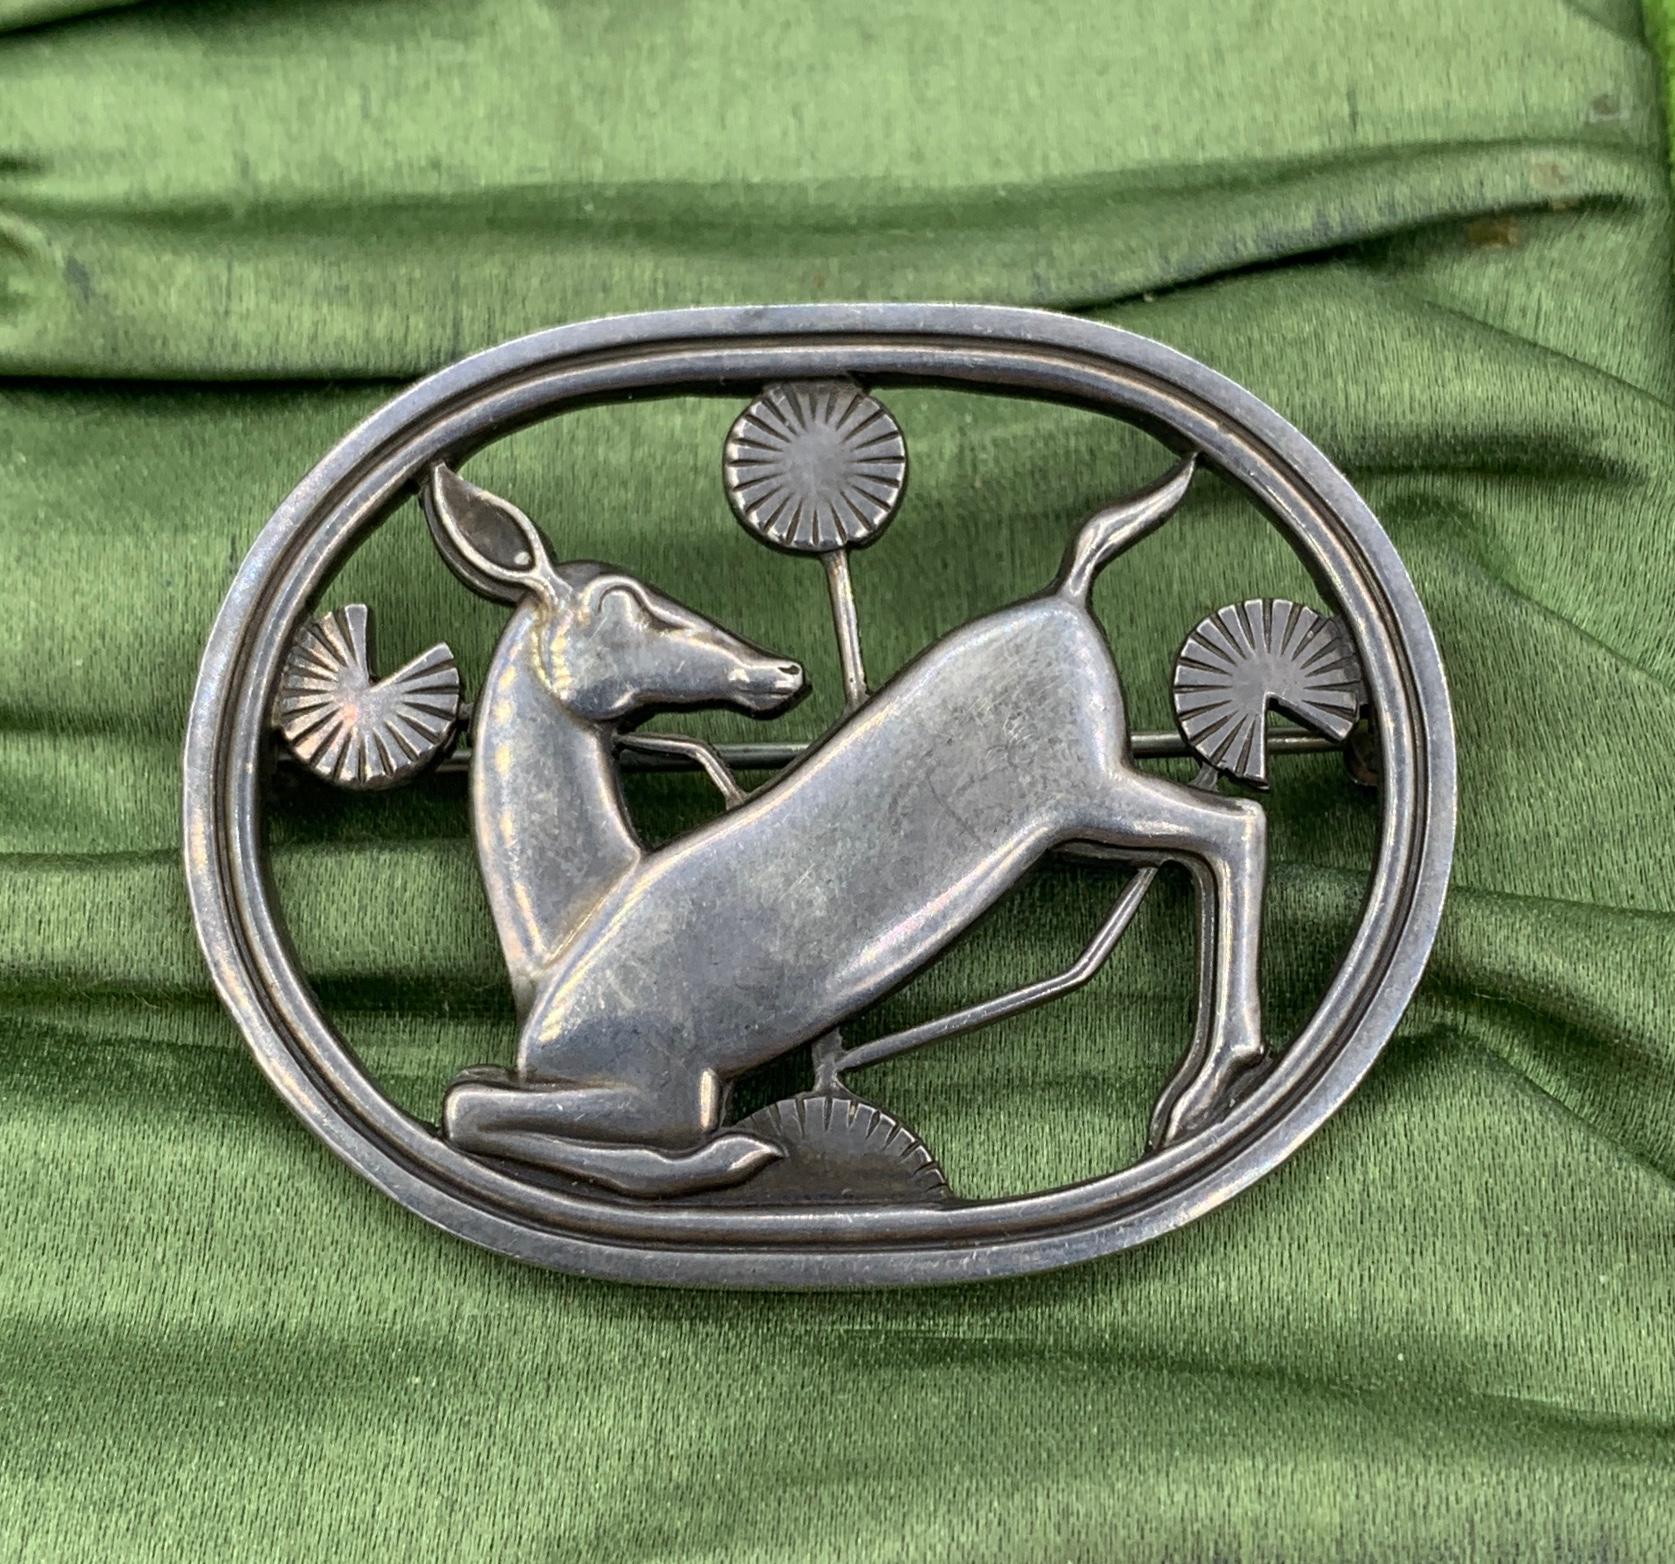 This is the wonderful Georg Jensen Denmark Sterling Silver Kneeling Deer Brooch.  The brooch is fully hallmarked with the Georg Jensen oval dotted punch, 925 Sterling Denmark and design number 256.  The classic brooch with open work design and the